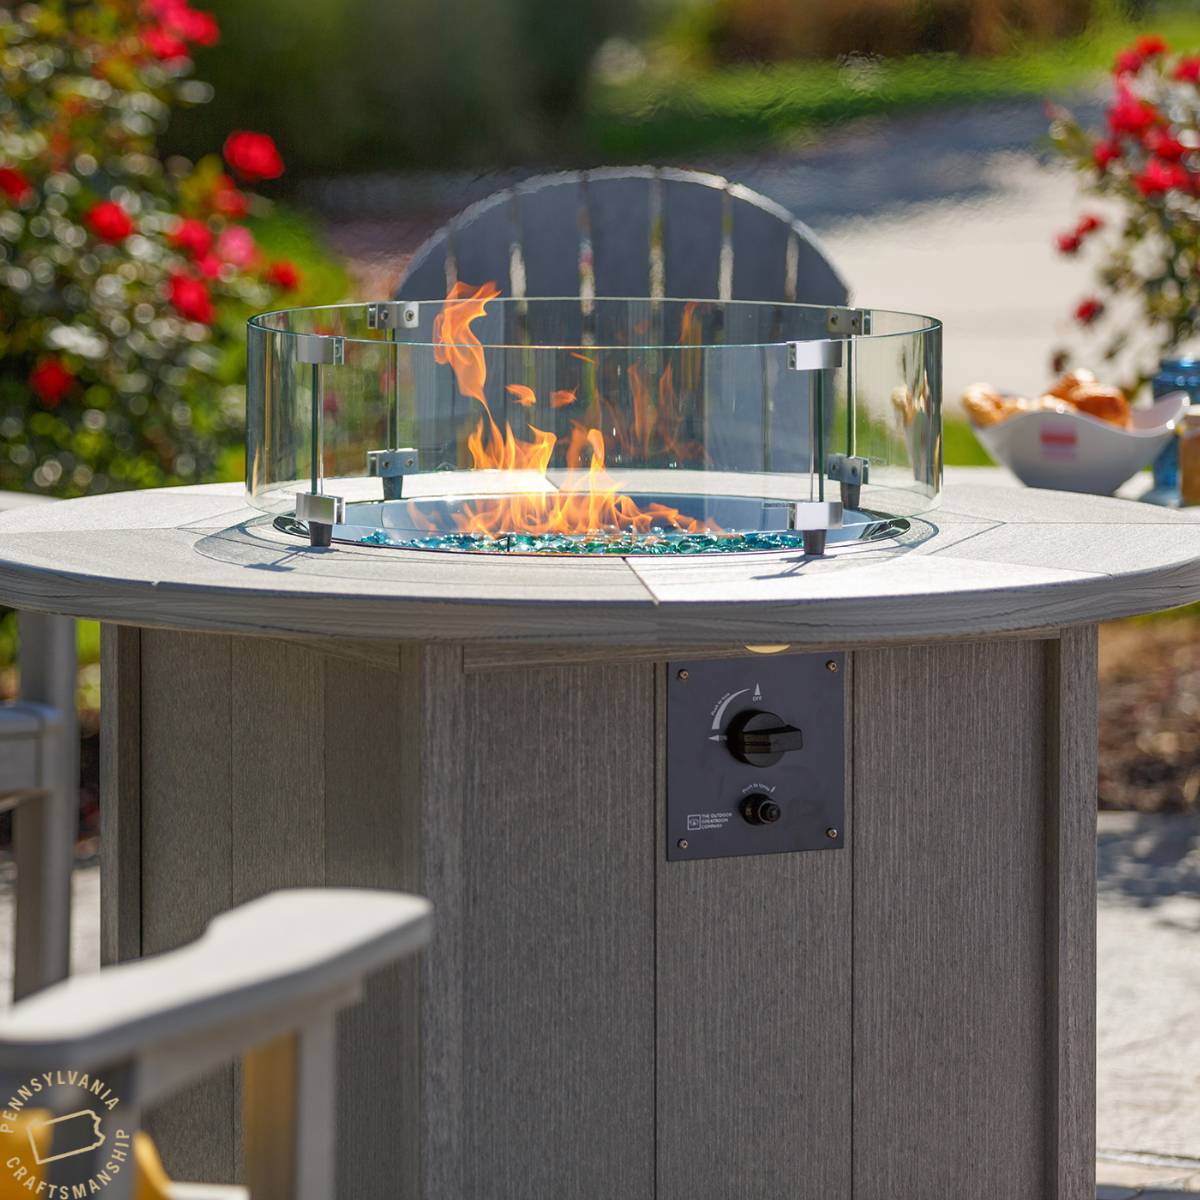 SeaAira 48" Round Fire Pit - snyders.furniture